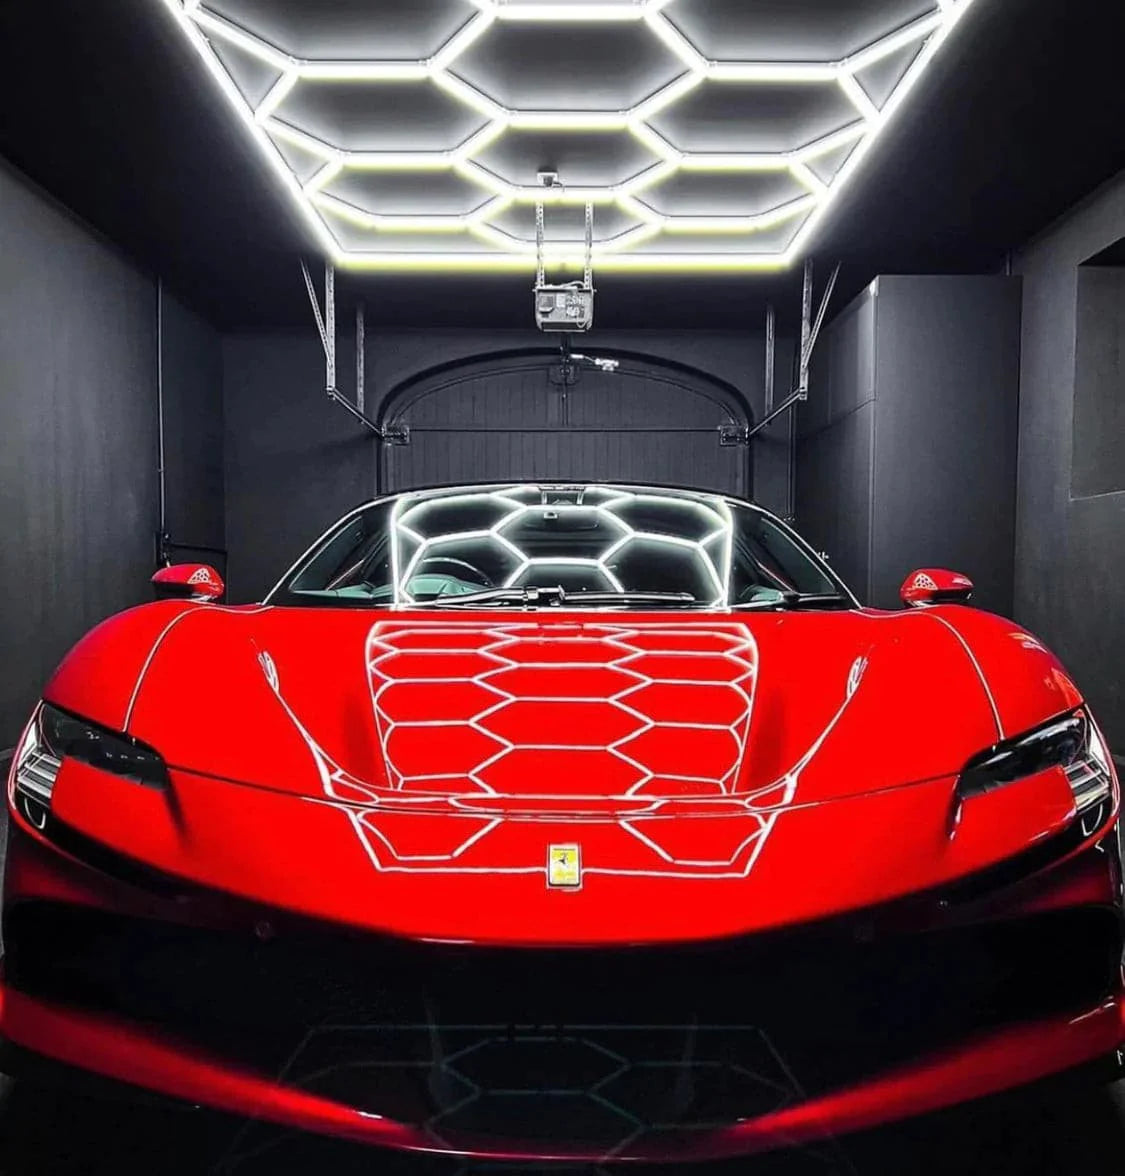 Brighter Side Lighting HIVE Hexagon LED Lighting with Border in Garage with Ferrari